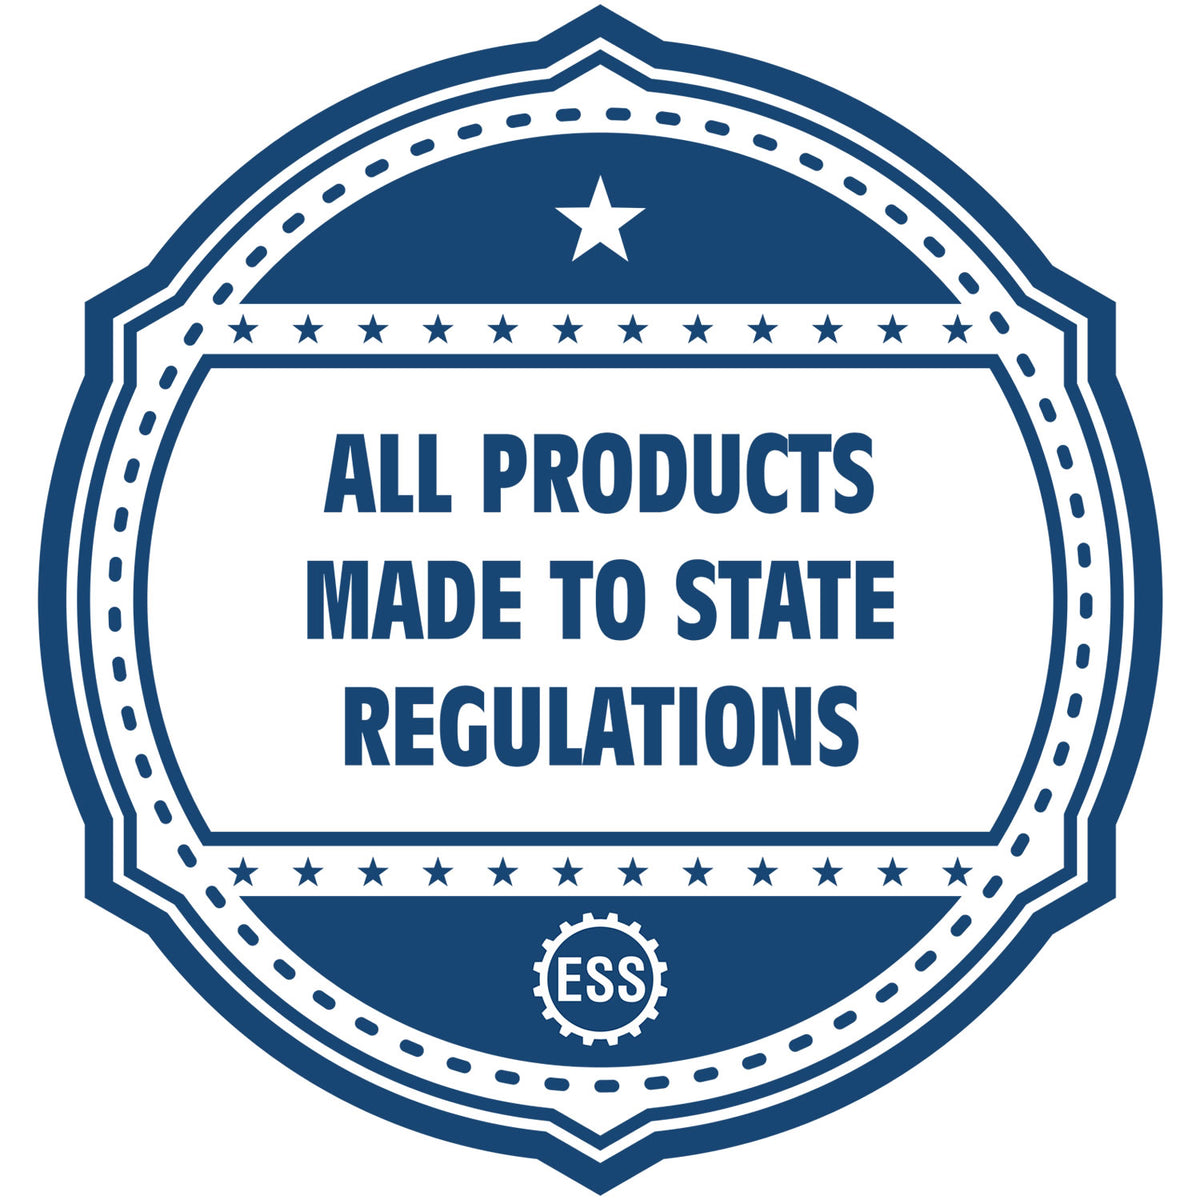 A blue icon or badge for the Gift Delaware Architect Seal showing that this product is made in compliance with state regulations.